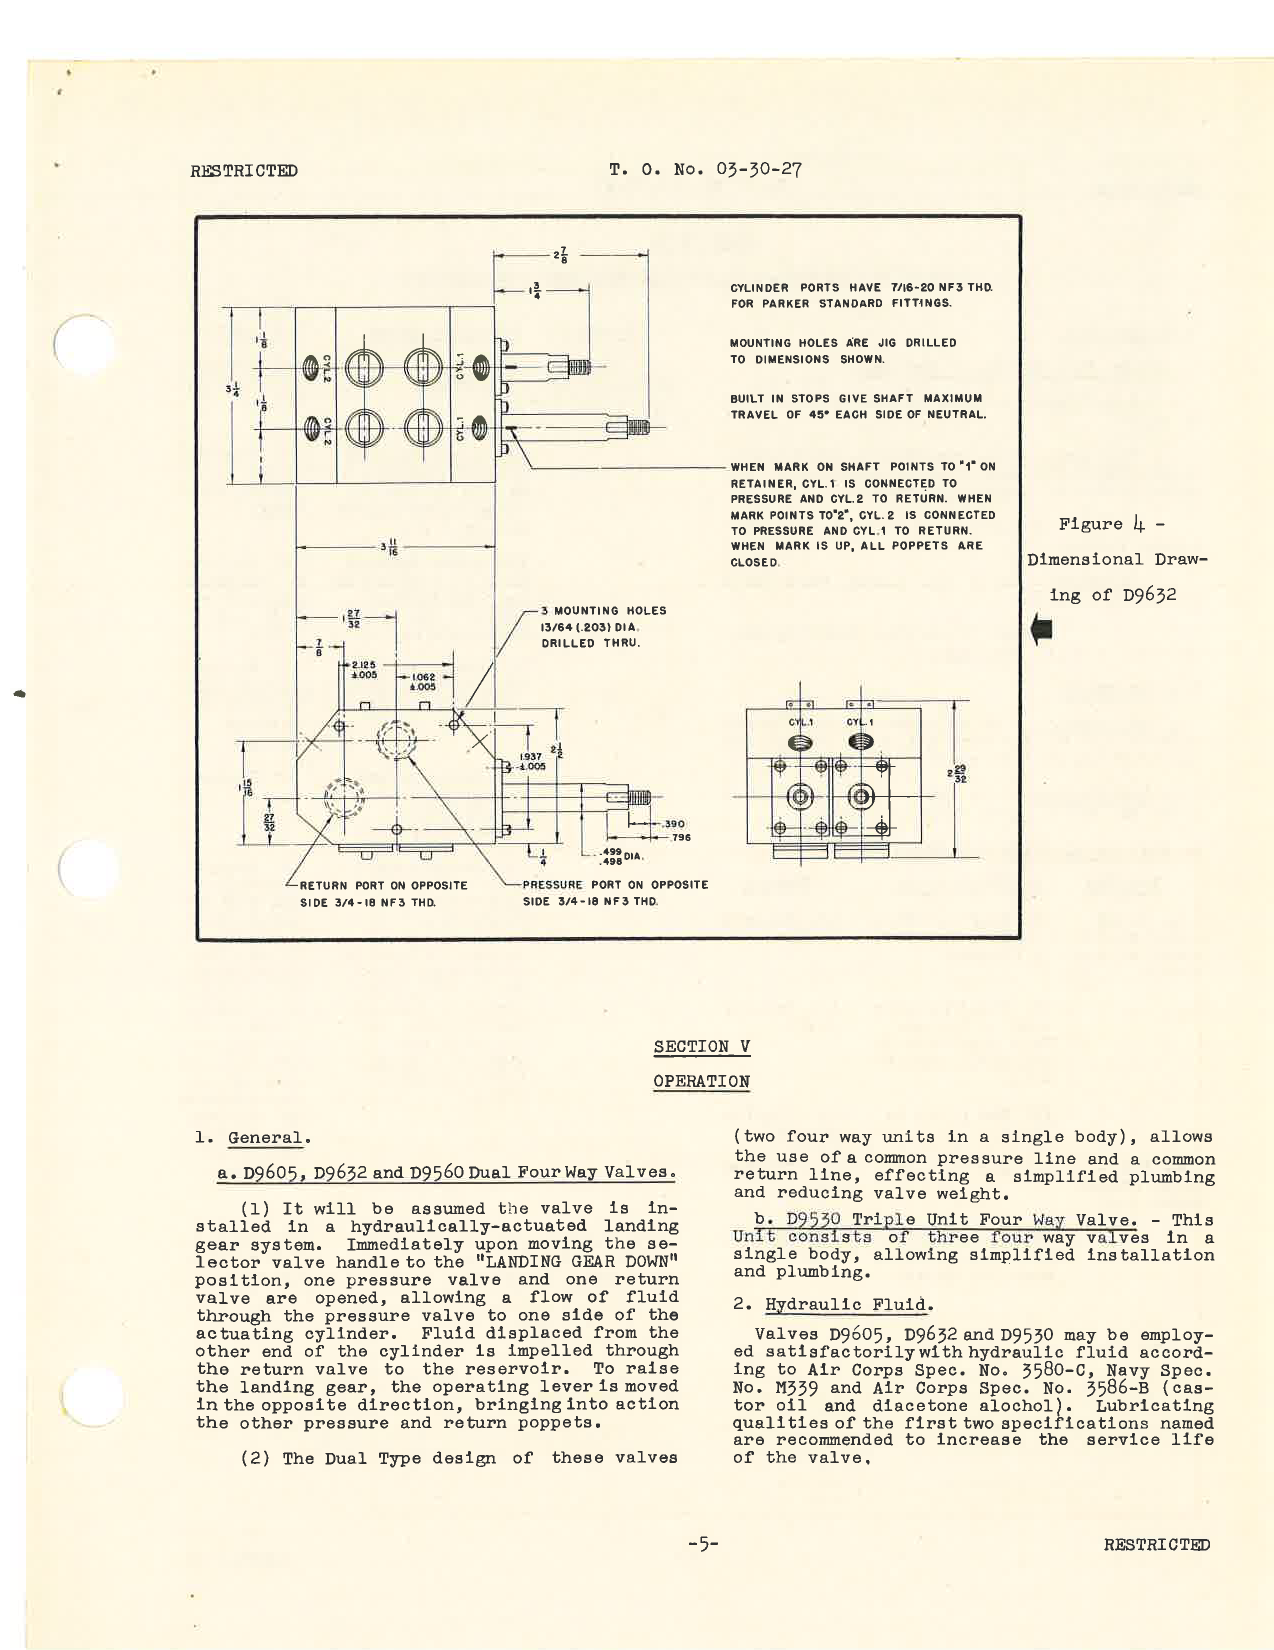 Sample page 7 from AirCorps Library document: Handbook of Instructions with Parts Catalog for Hydraulic Selector Valves